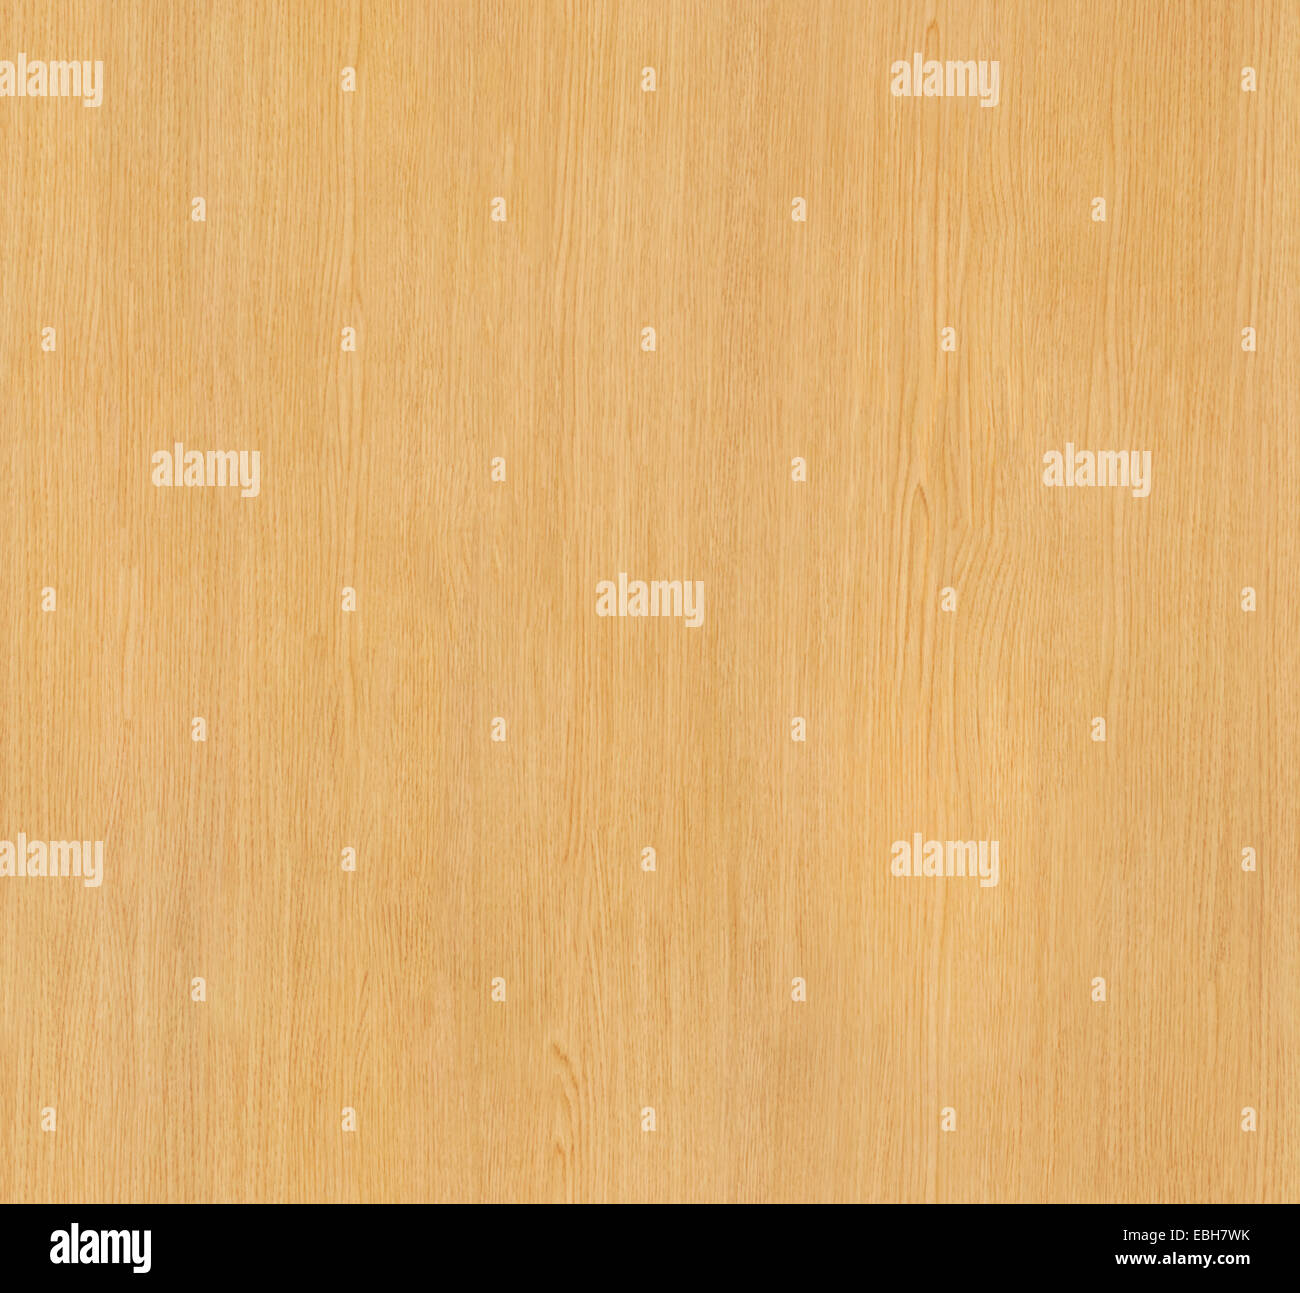 Light wood seamless background texture with grains and knots, background can be tiled. Stock Photo